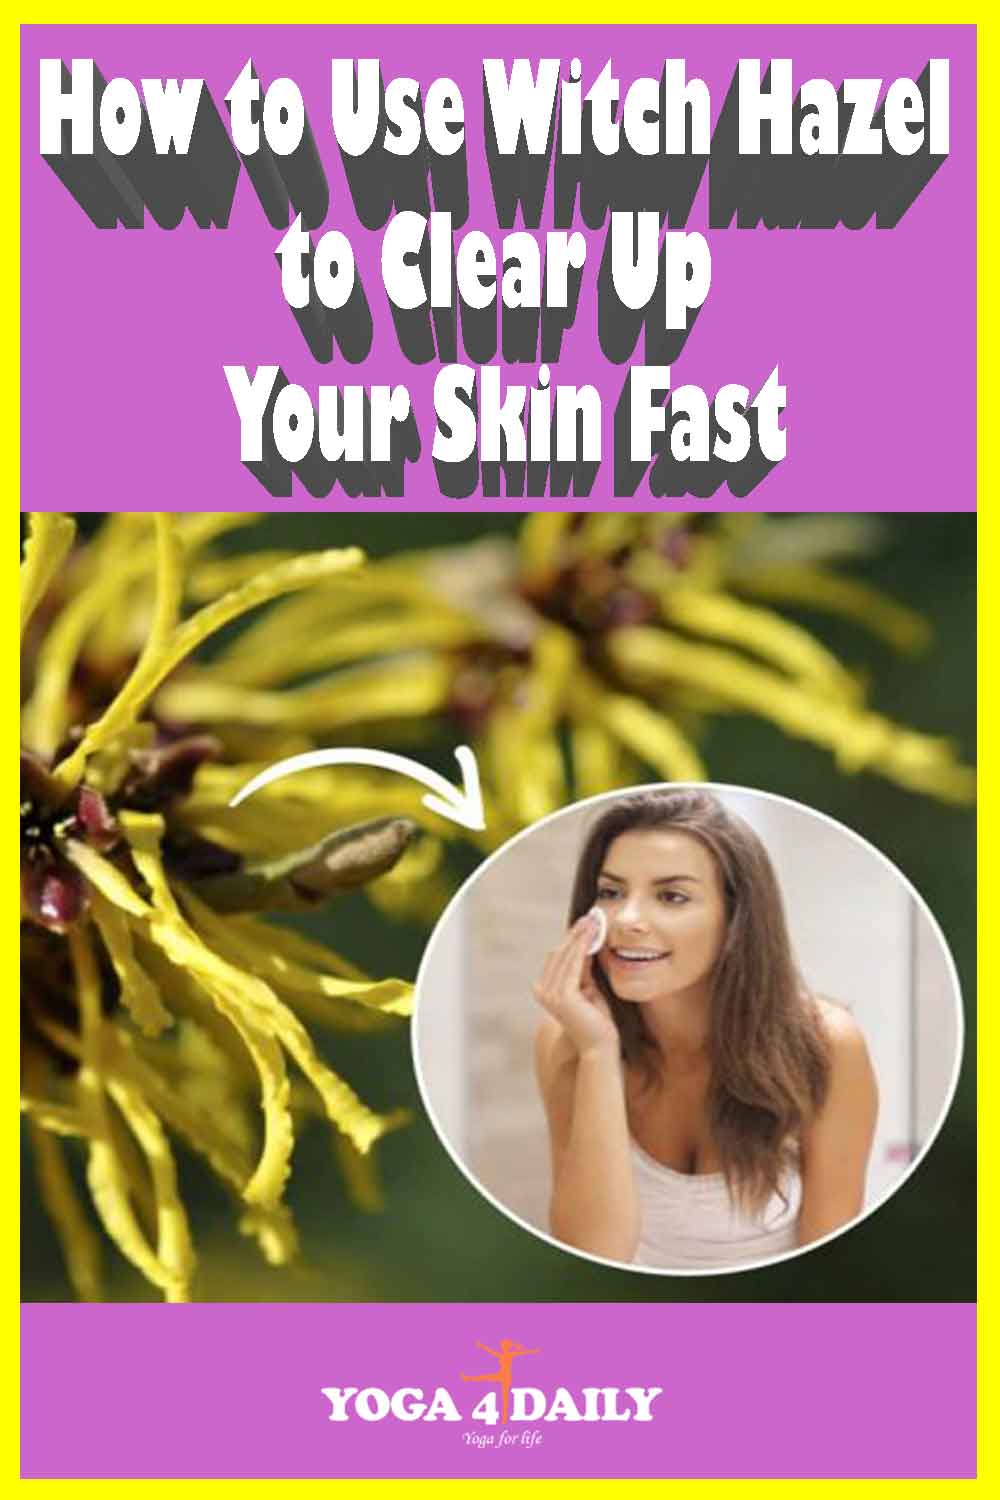 How to Use Witch Hazel to Clear Up Your Skin Fast